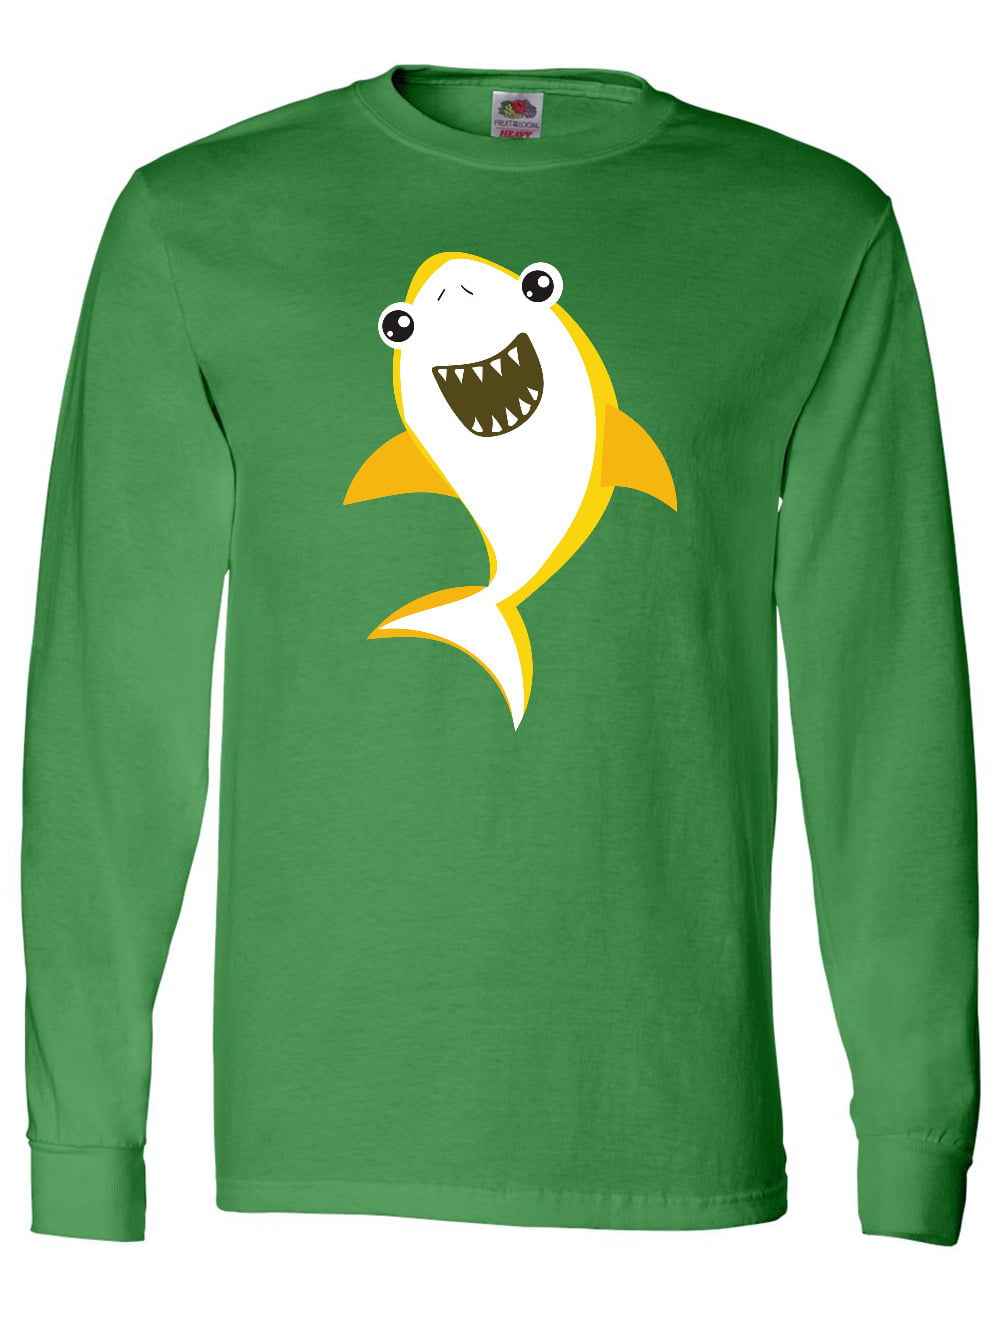  William Sharkspeare  Funny William Shakespeare Shark Shirt :  Clothing, Shoes & Jewelry